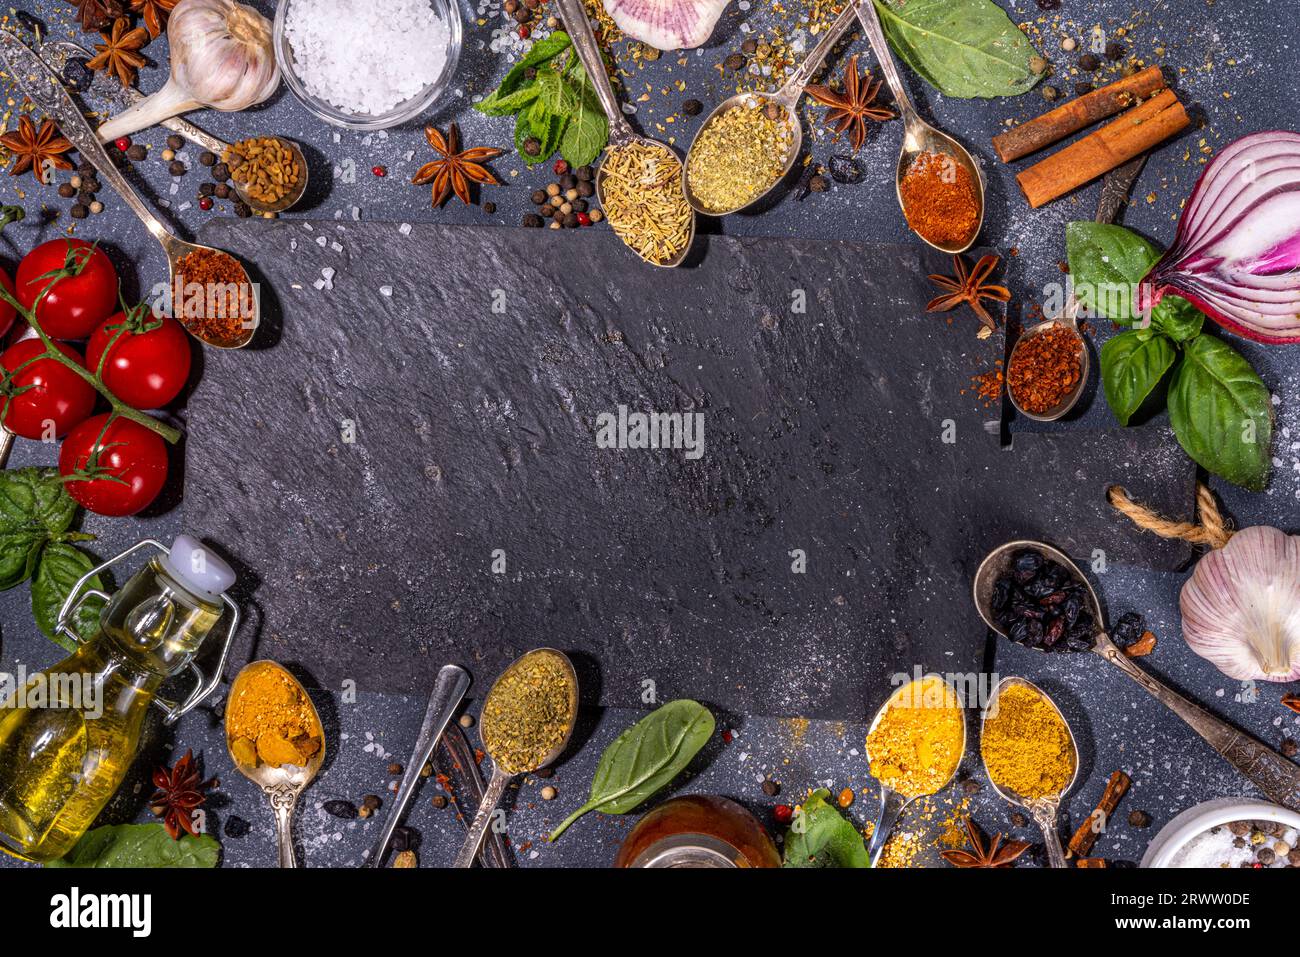 Spices for cooking on dark background . Different seasonings, spices and herbs paprika, pepper, turmeric, salt, basil, mint, cinnamon, garlic, olive o Stock Photo